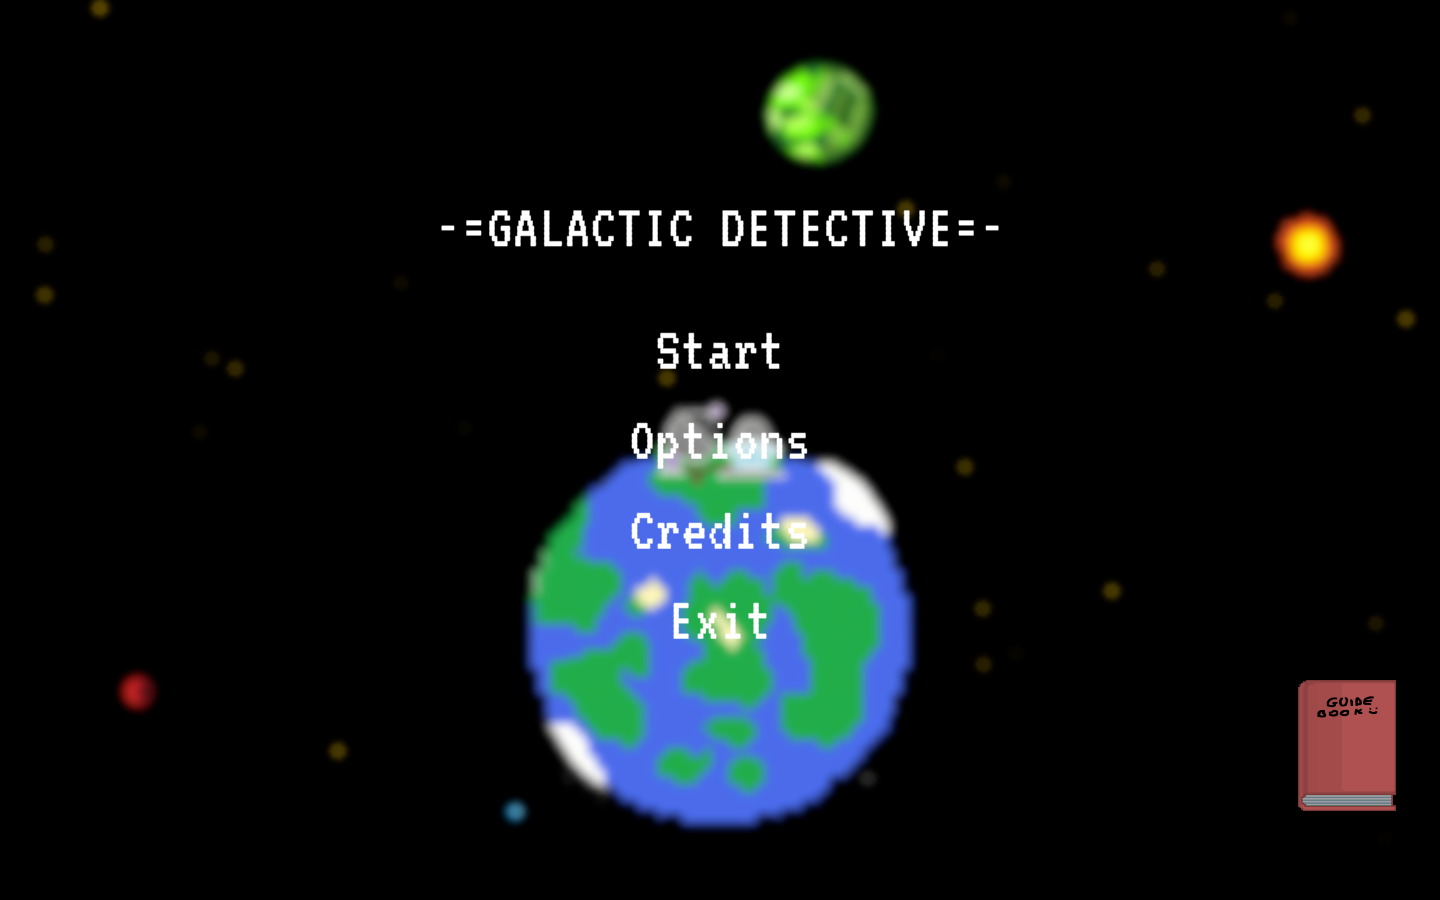 GalacticDetective